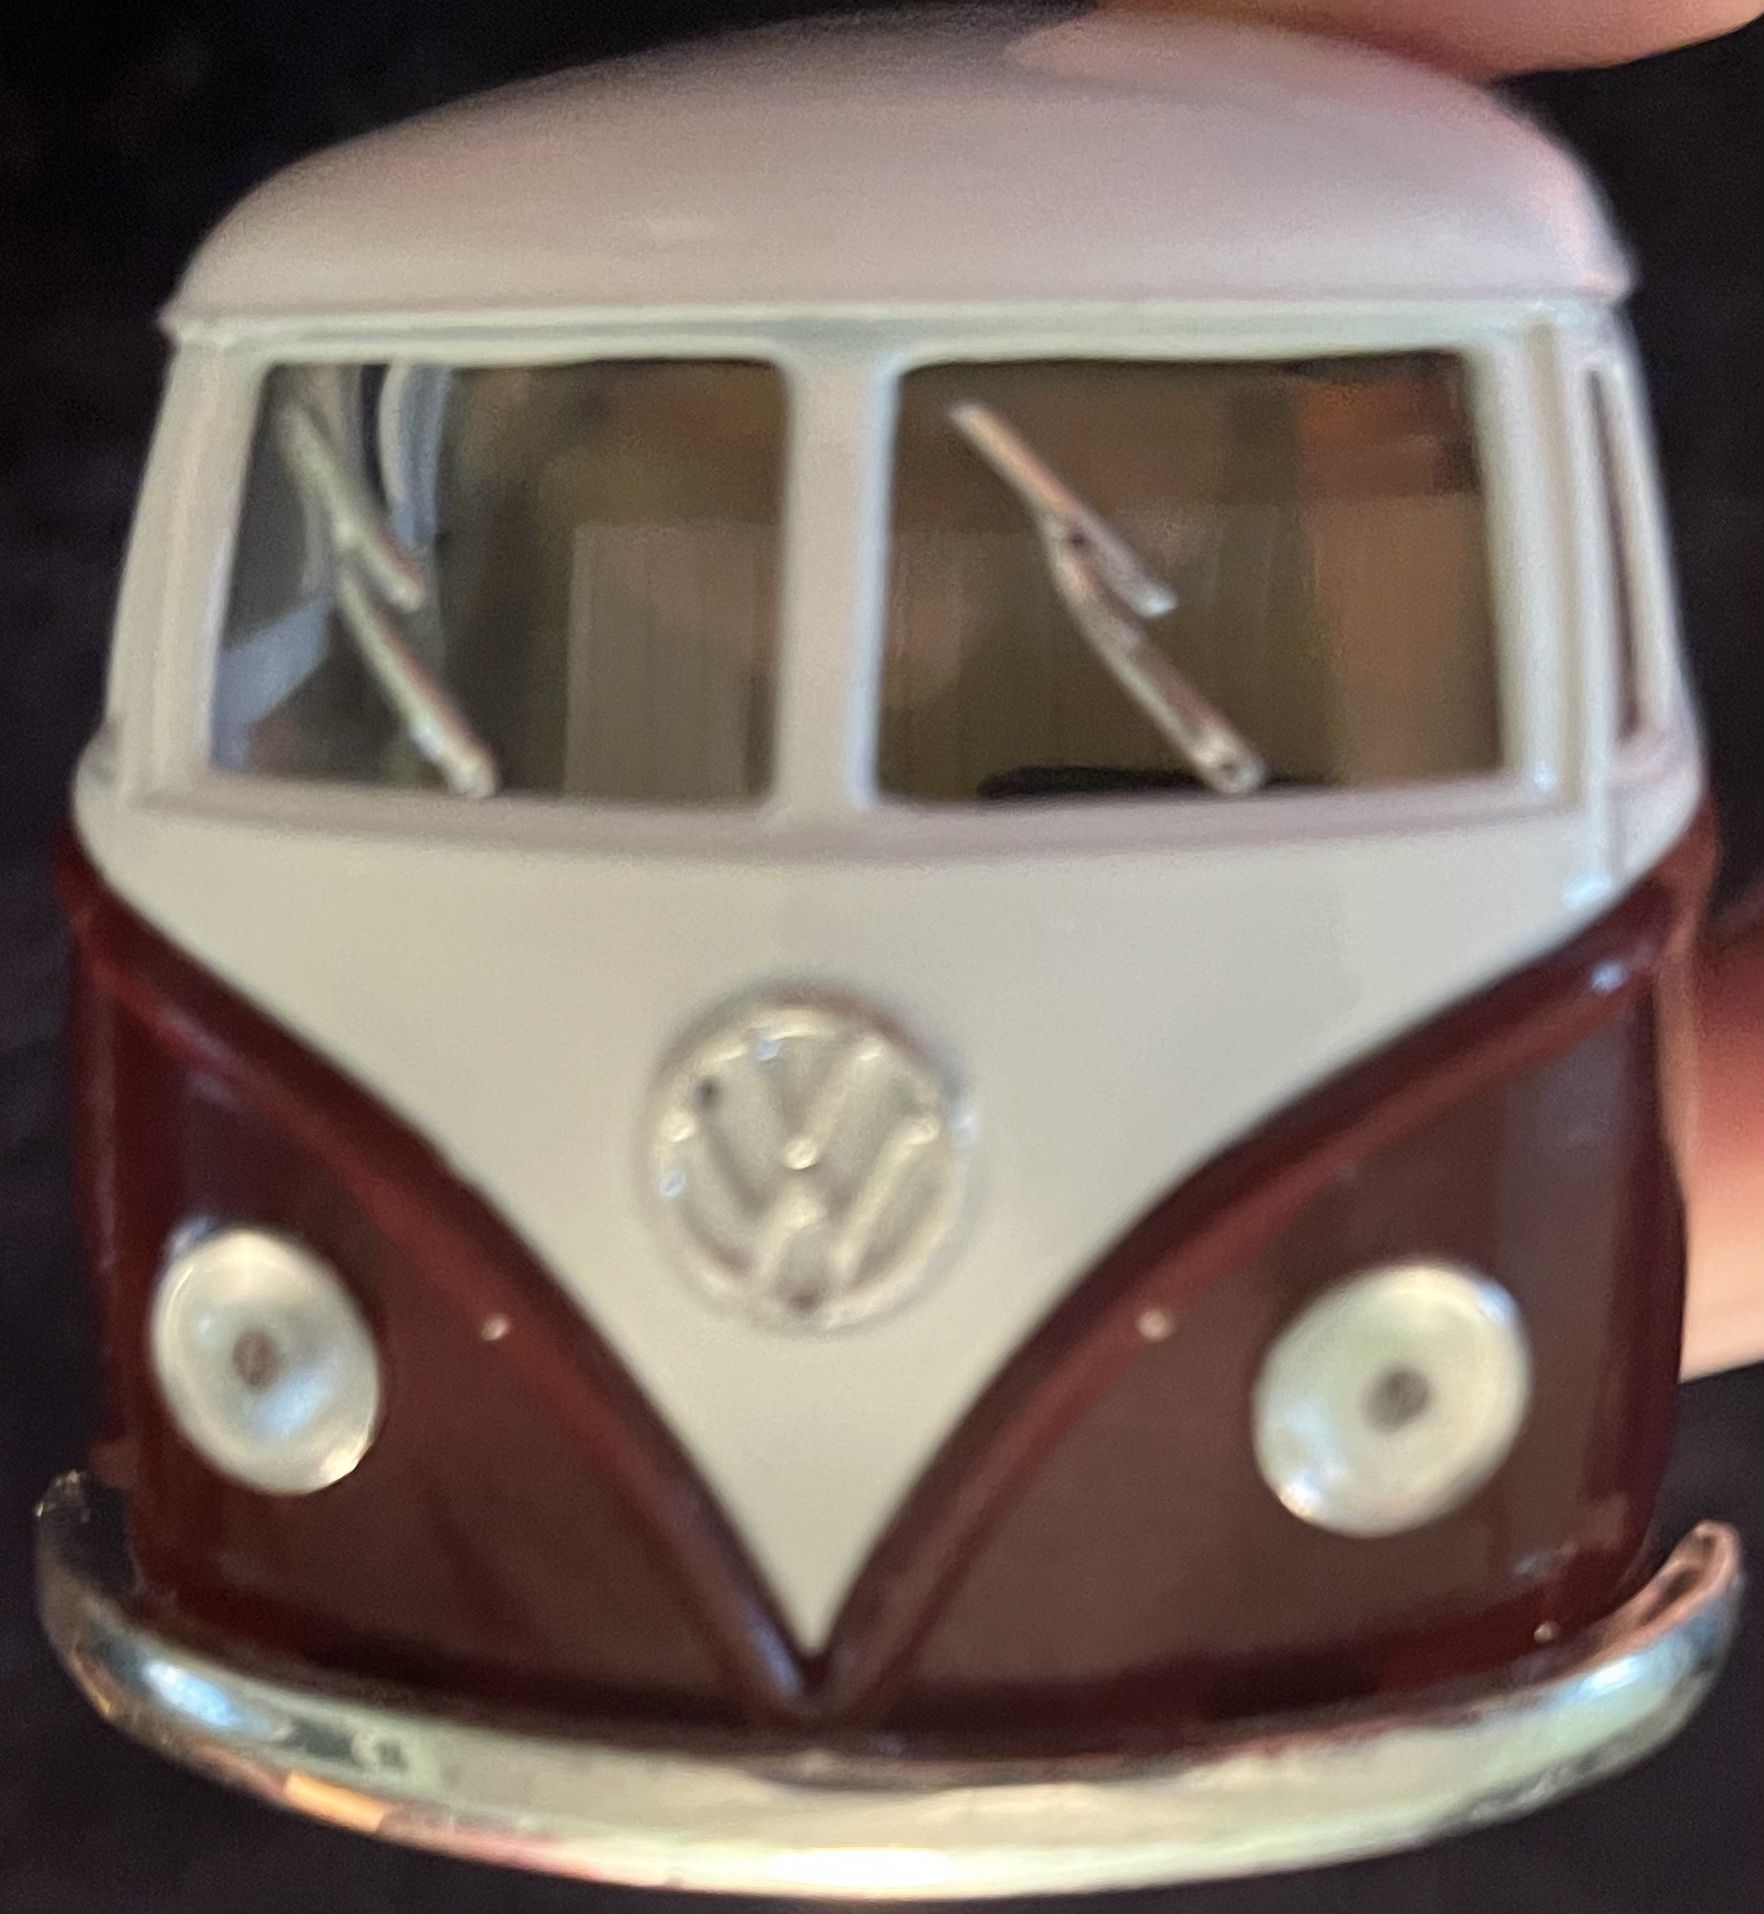 Extremely Popular Red & White Vintage VW Van Collectable Toy Car